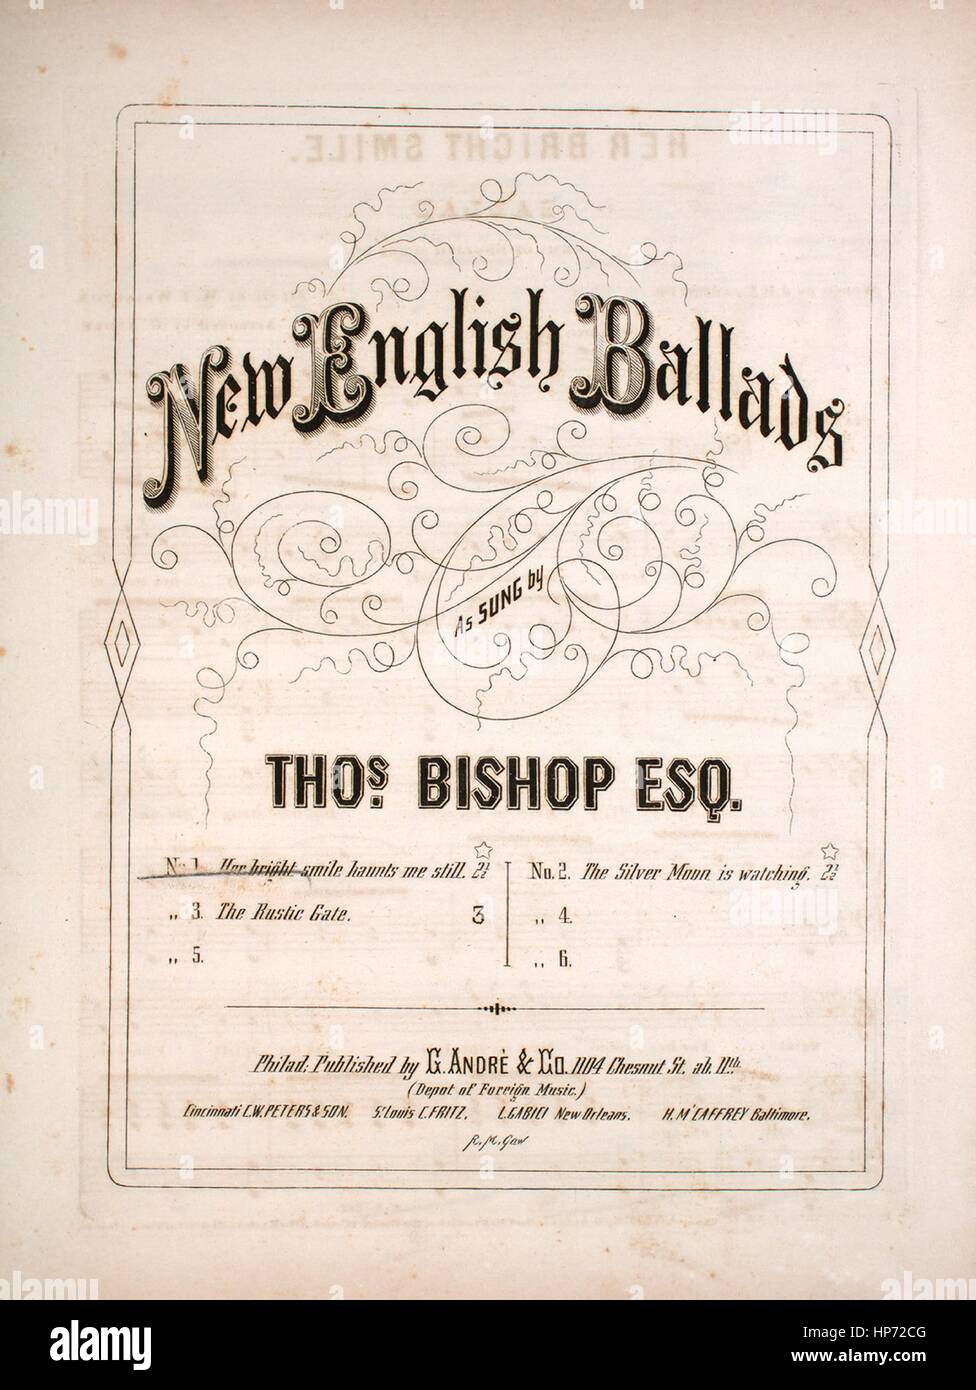 Sheet Music Cover Image Of The Song New English Ballads No 1 Her Bright Smile Haunts Me Still With Original Authorship Notes Reading Words By Je Carpenter Music By Wt Wrighton Arranged